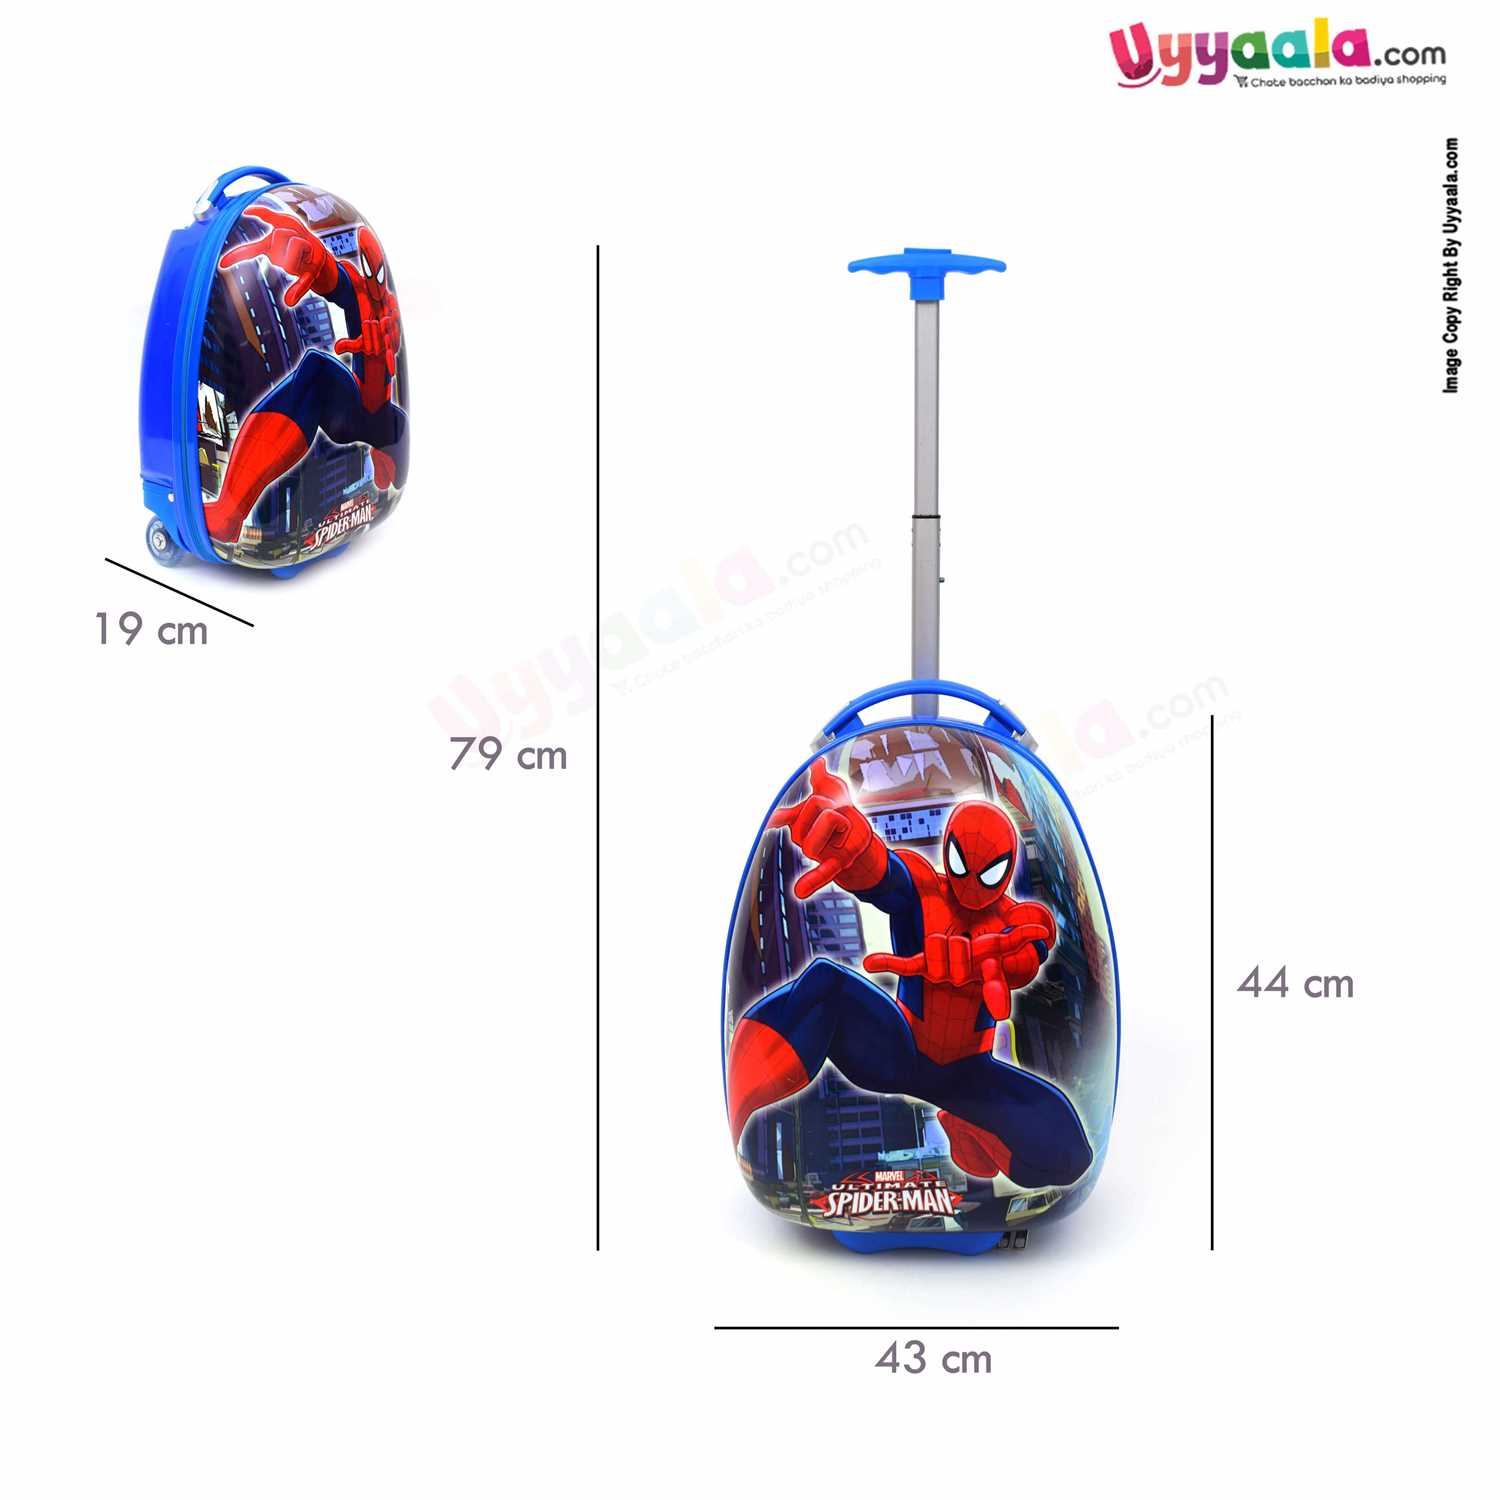 Travel Trolley Bag for Kids with Marvel Ultimate Spider Man Print 17 Inches - Blue